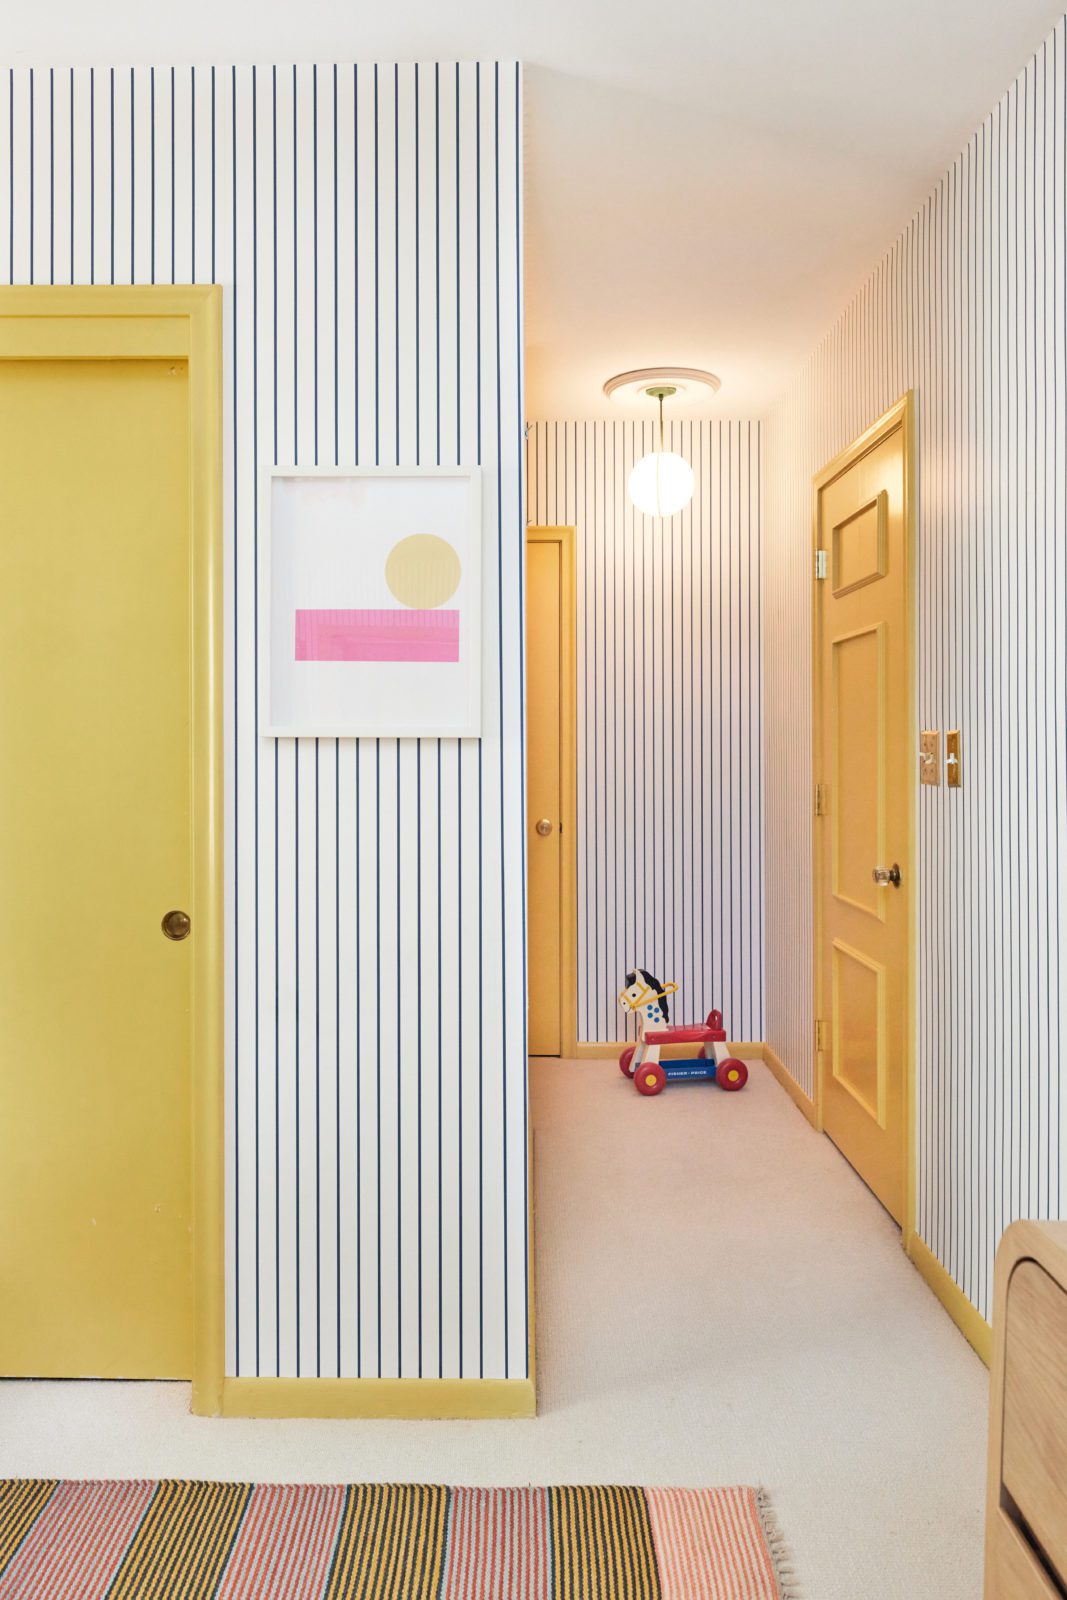 Kids' Room Art and How to Select the Right Pieces for Your Space | Wit & Delight